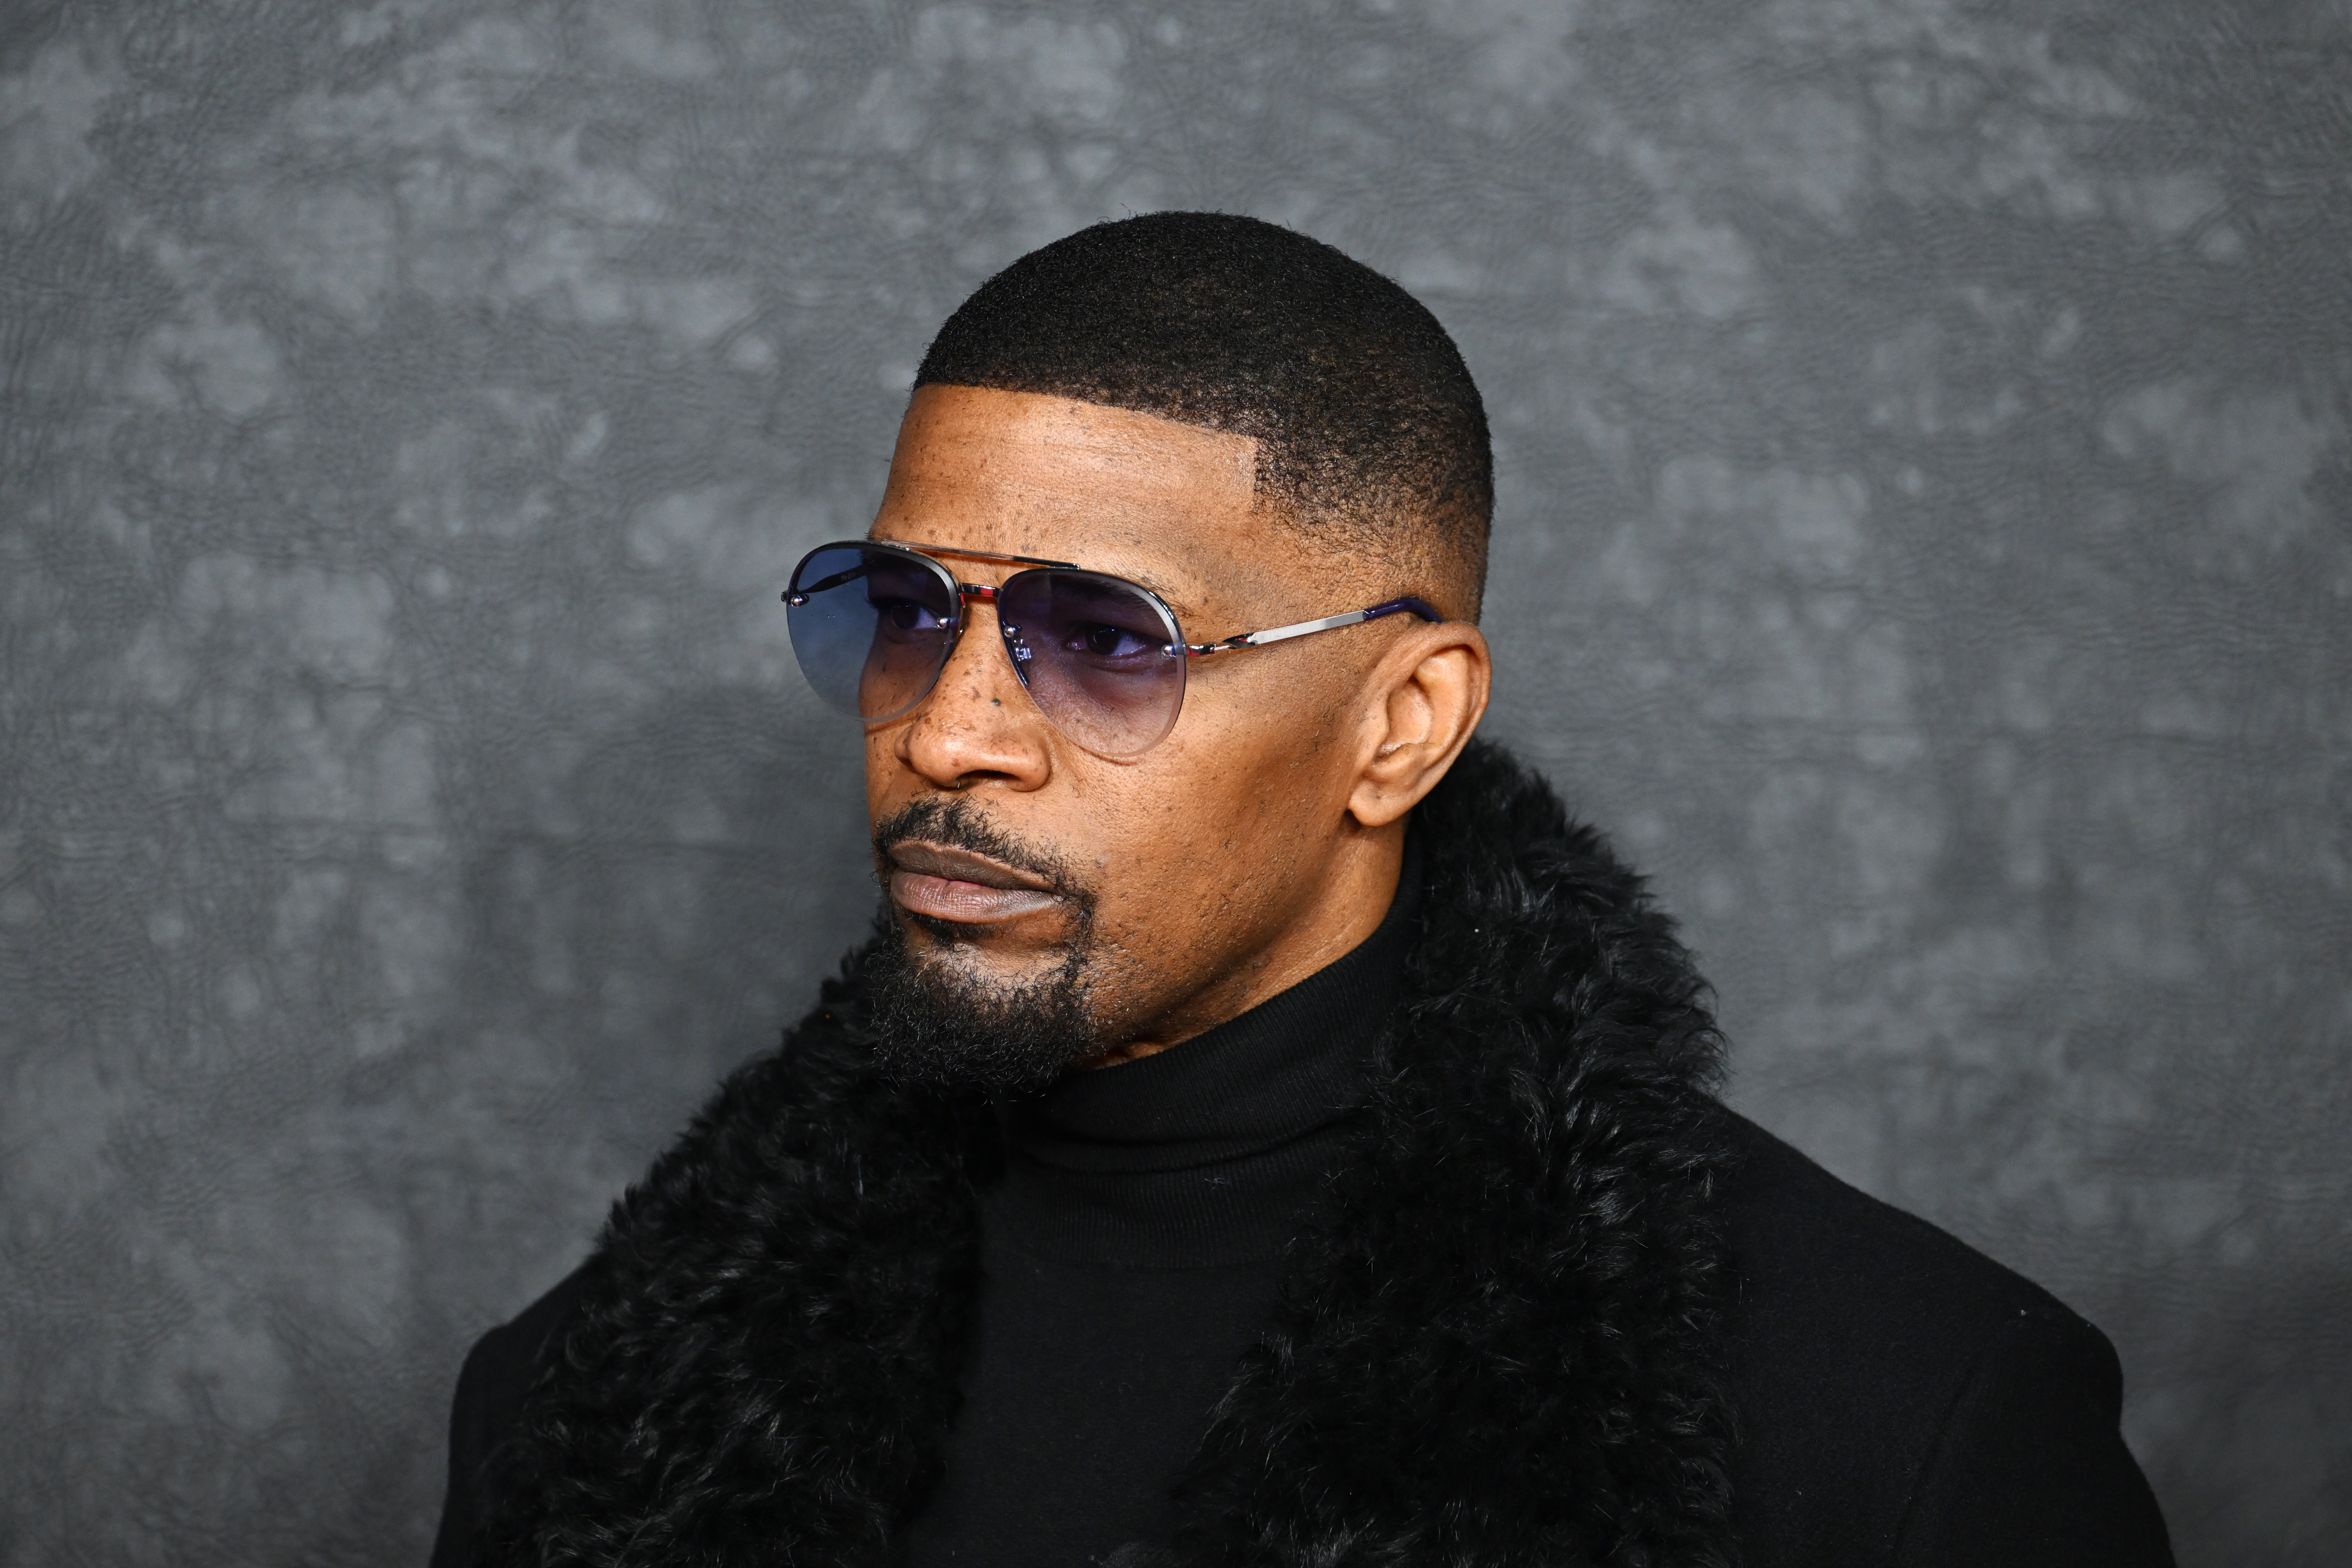 Jamie Foxx in London, England on February 15, 2023 | Source: Getty Images